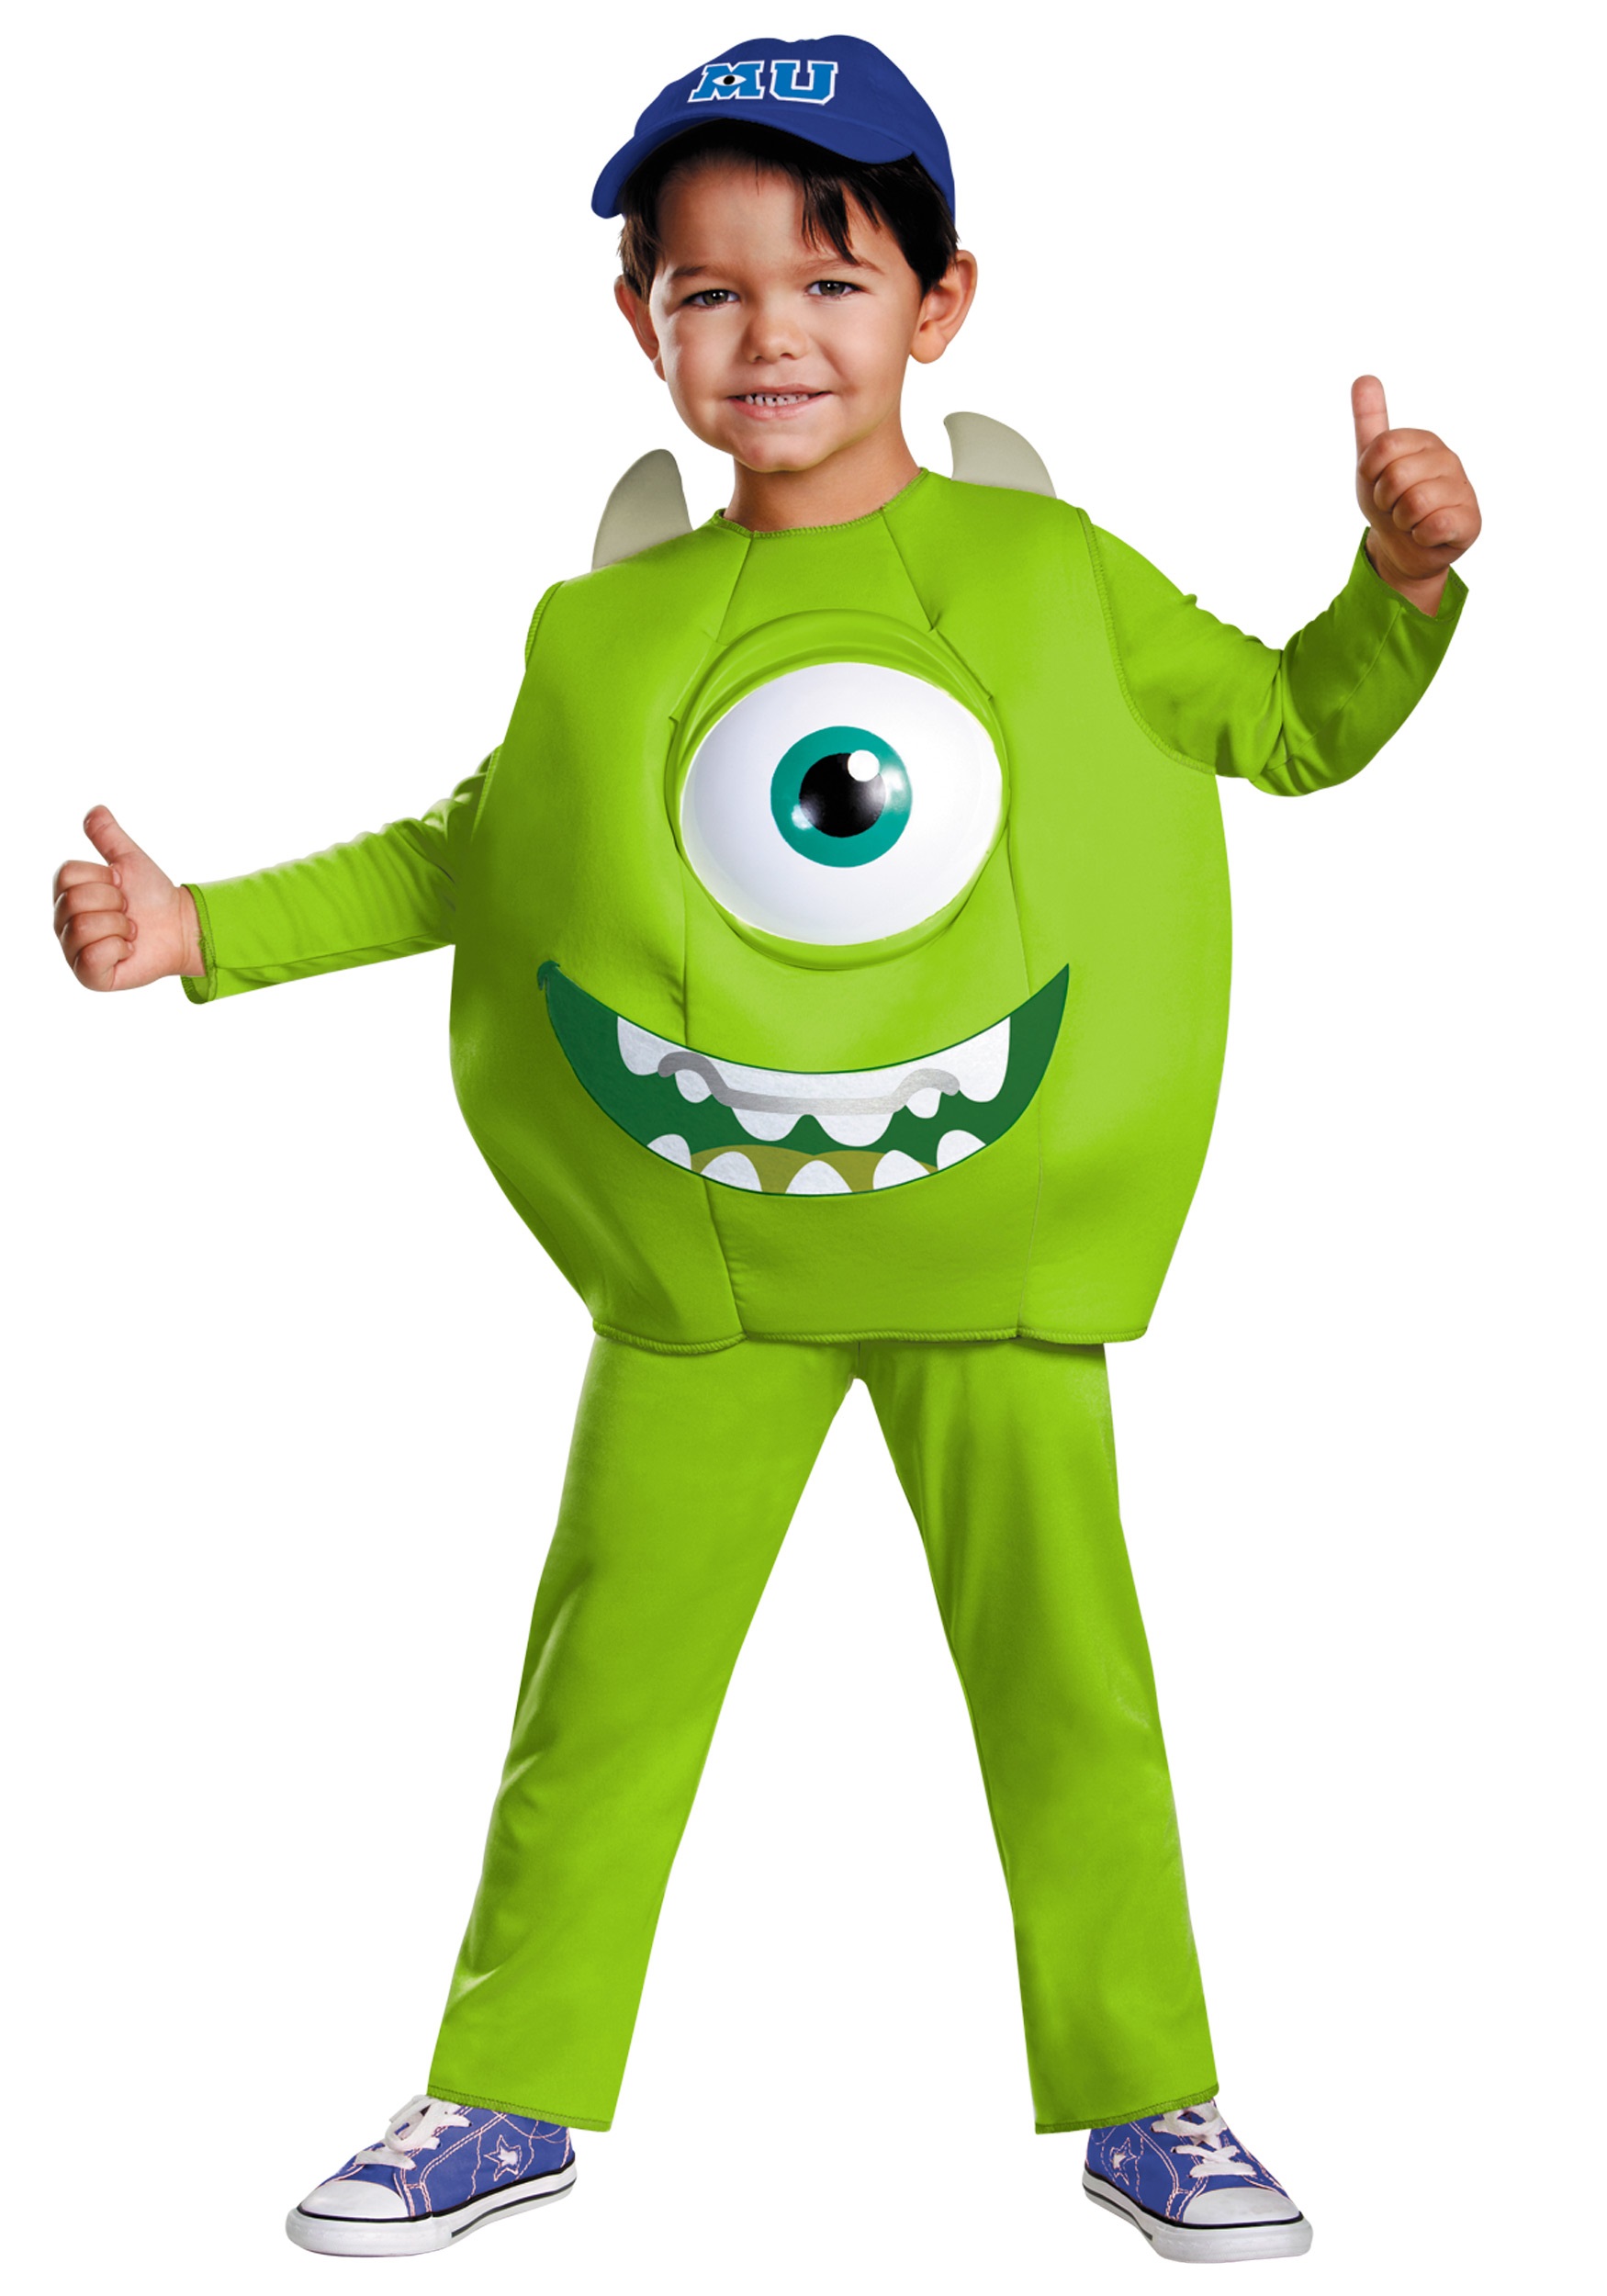 Photos - Fancy Dress Toddler Disguise  Mike Deluxe Costume Green/Blue/White DI58774 